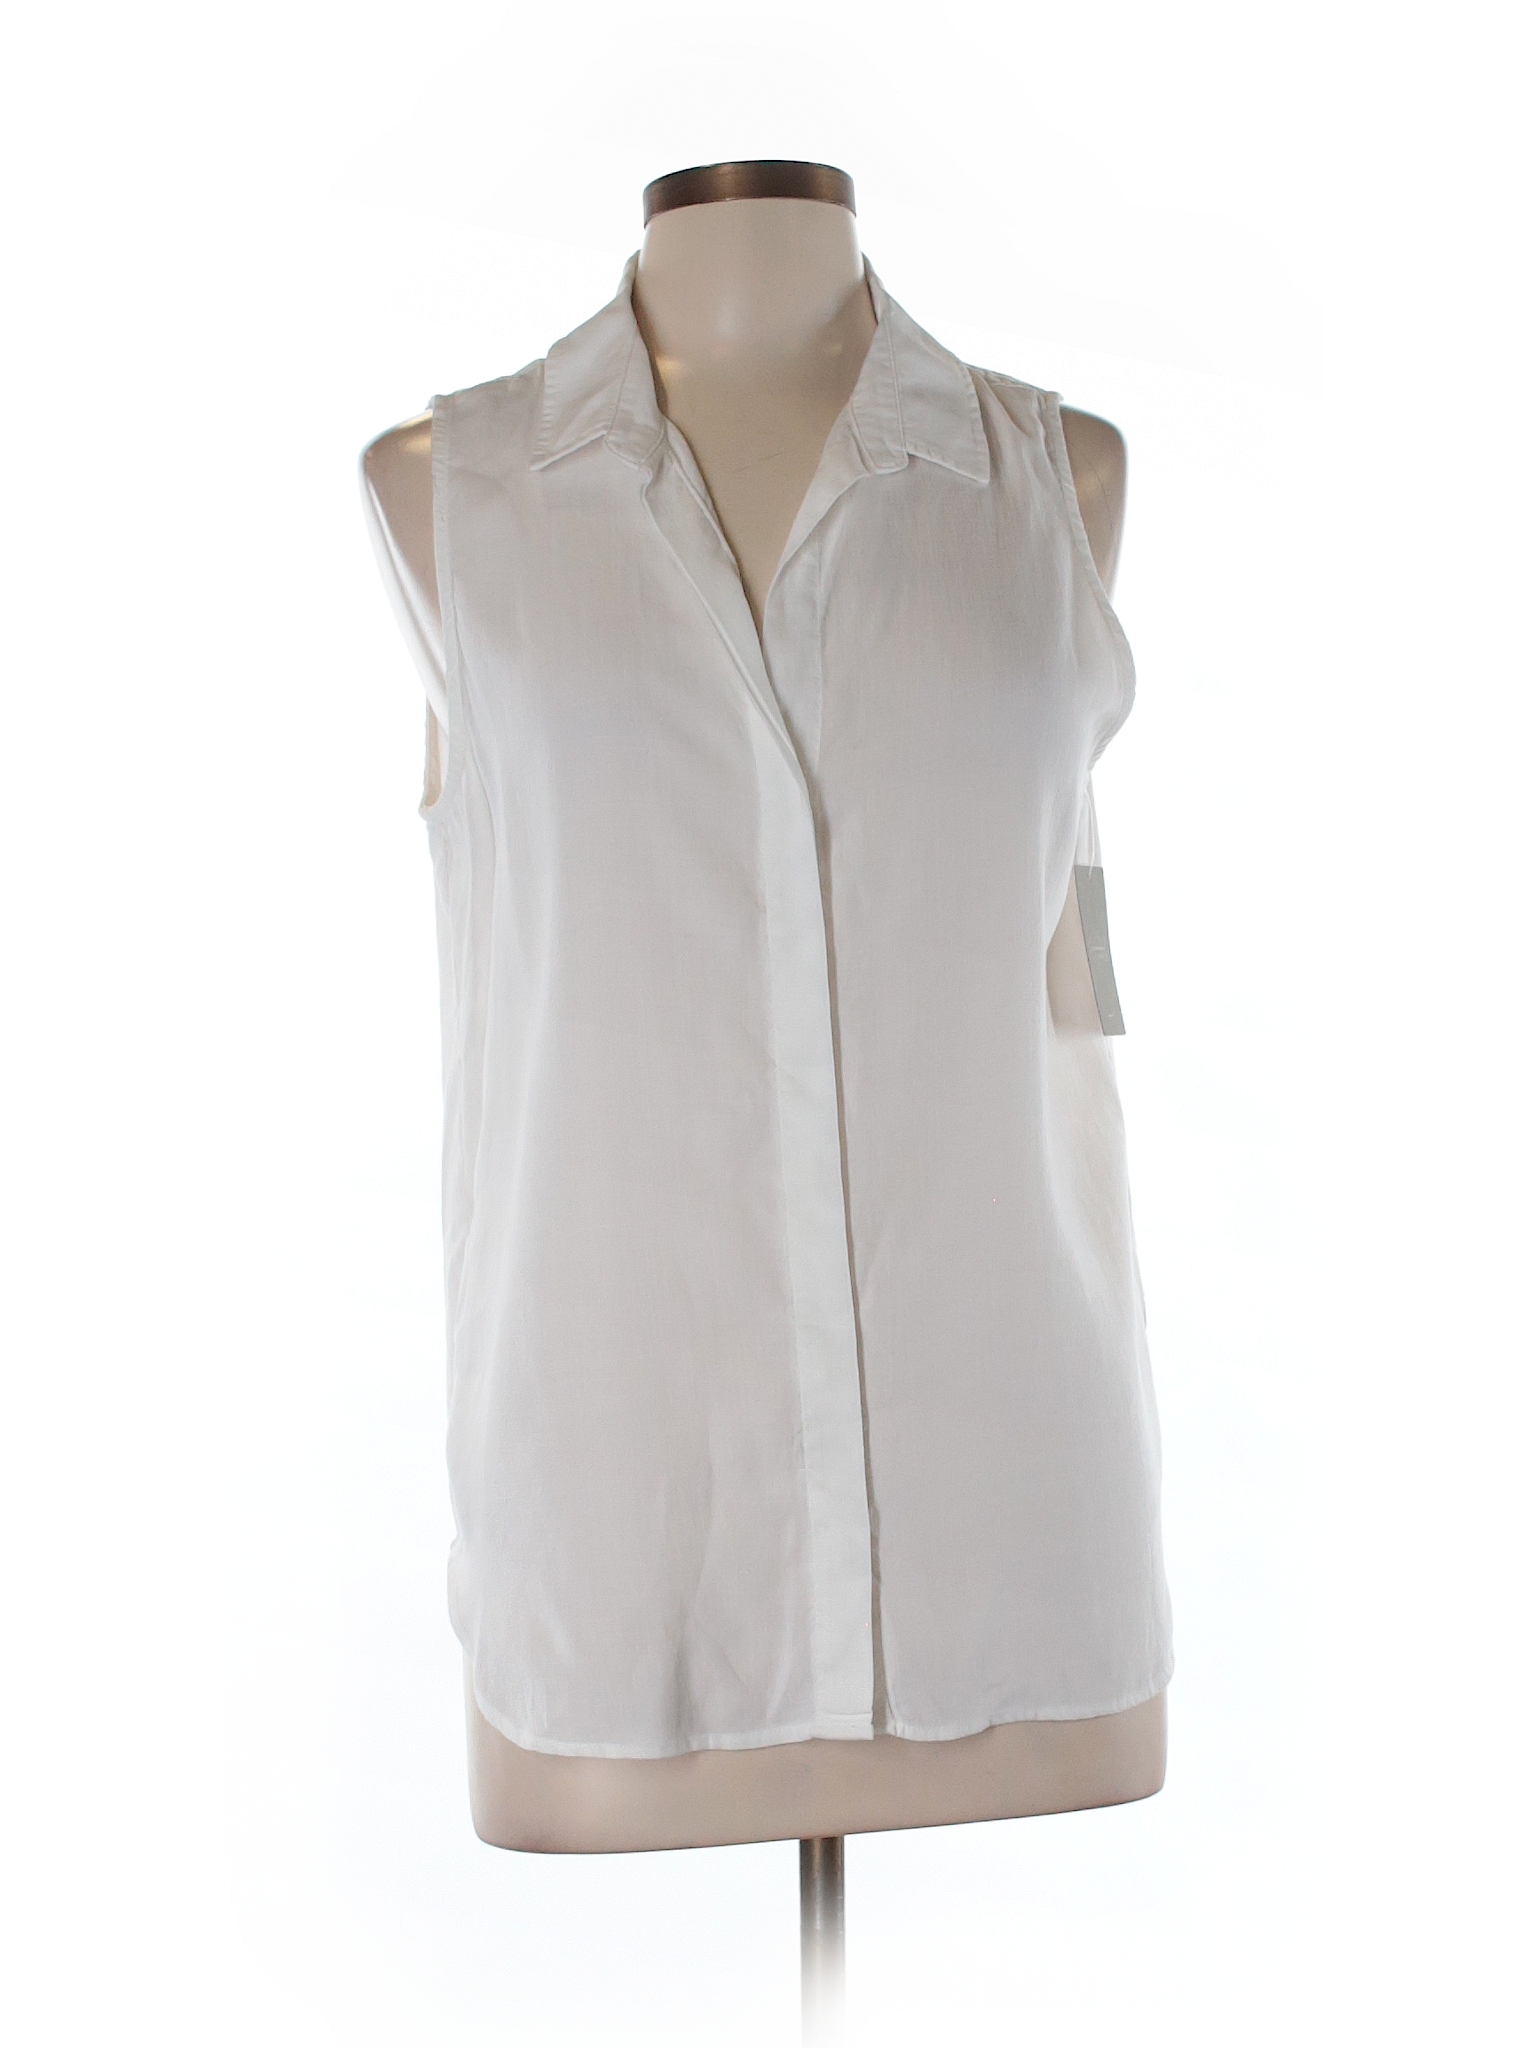 Cloth & Stone 100% Tencel Lyocell Solid White Sleeveless Button-Down ...